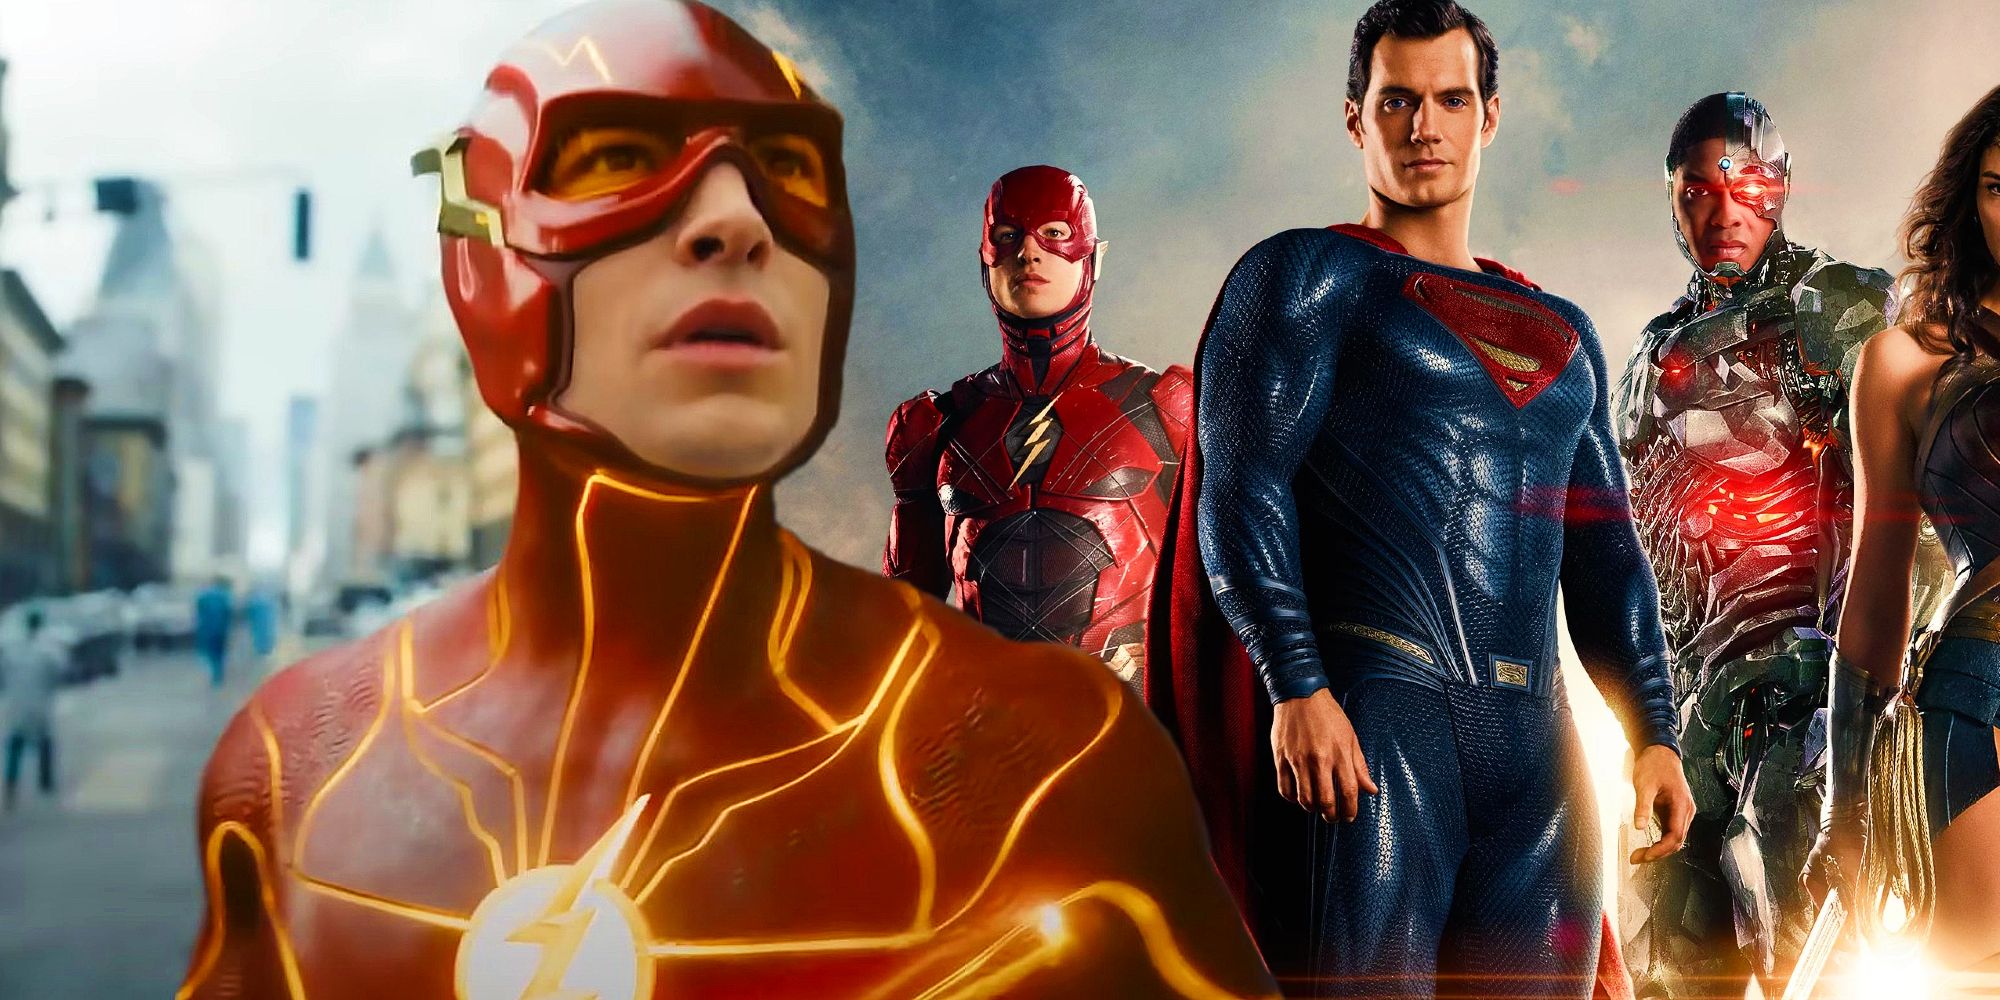 The Flash from the 2023 movie next to Flash, Superman, and Cyborg from the DCEU's Justice League